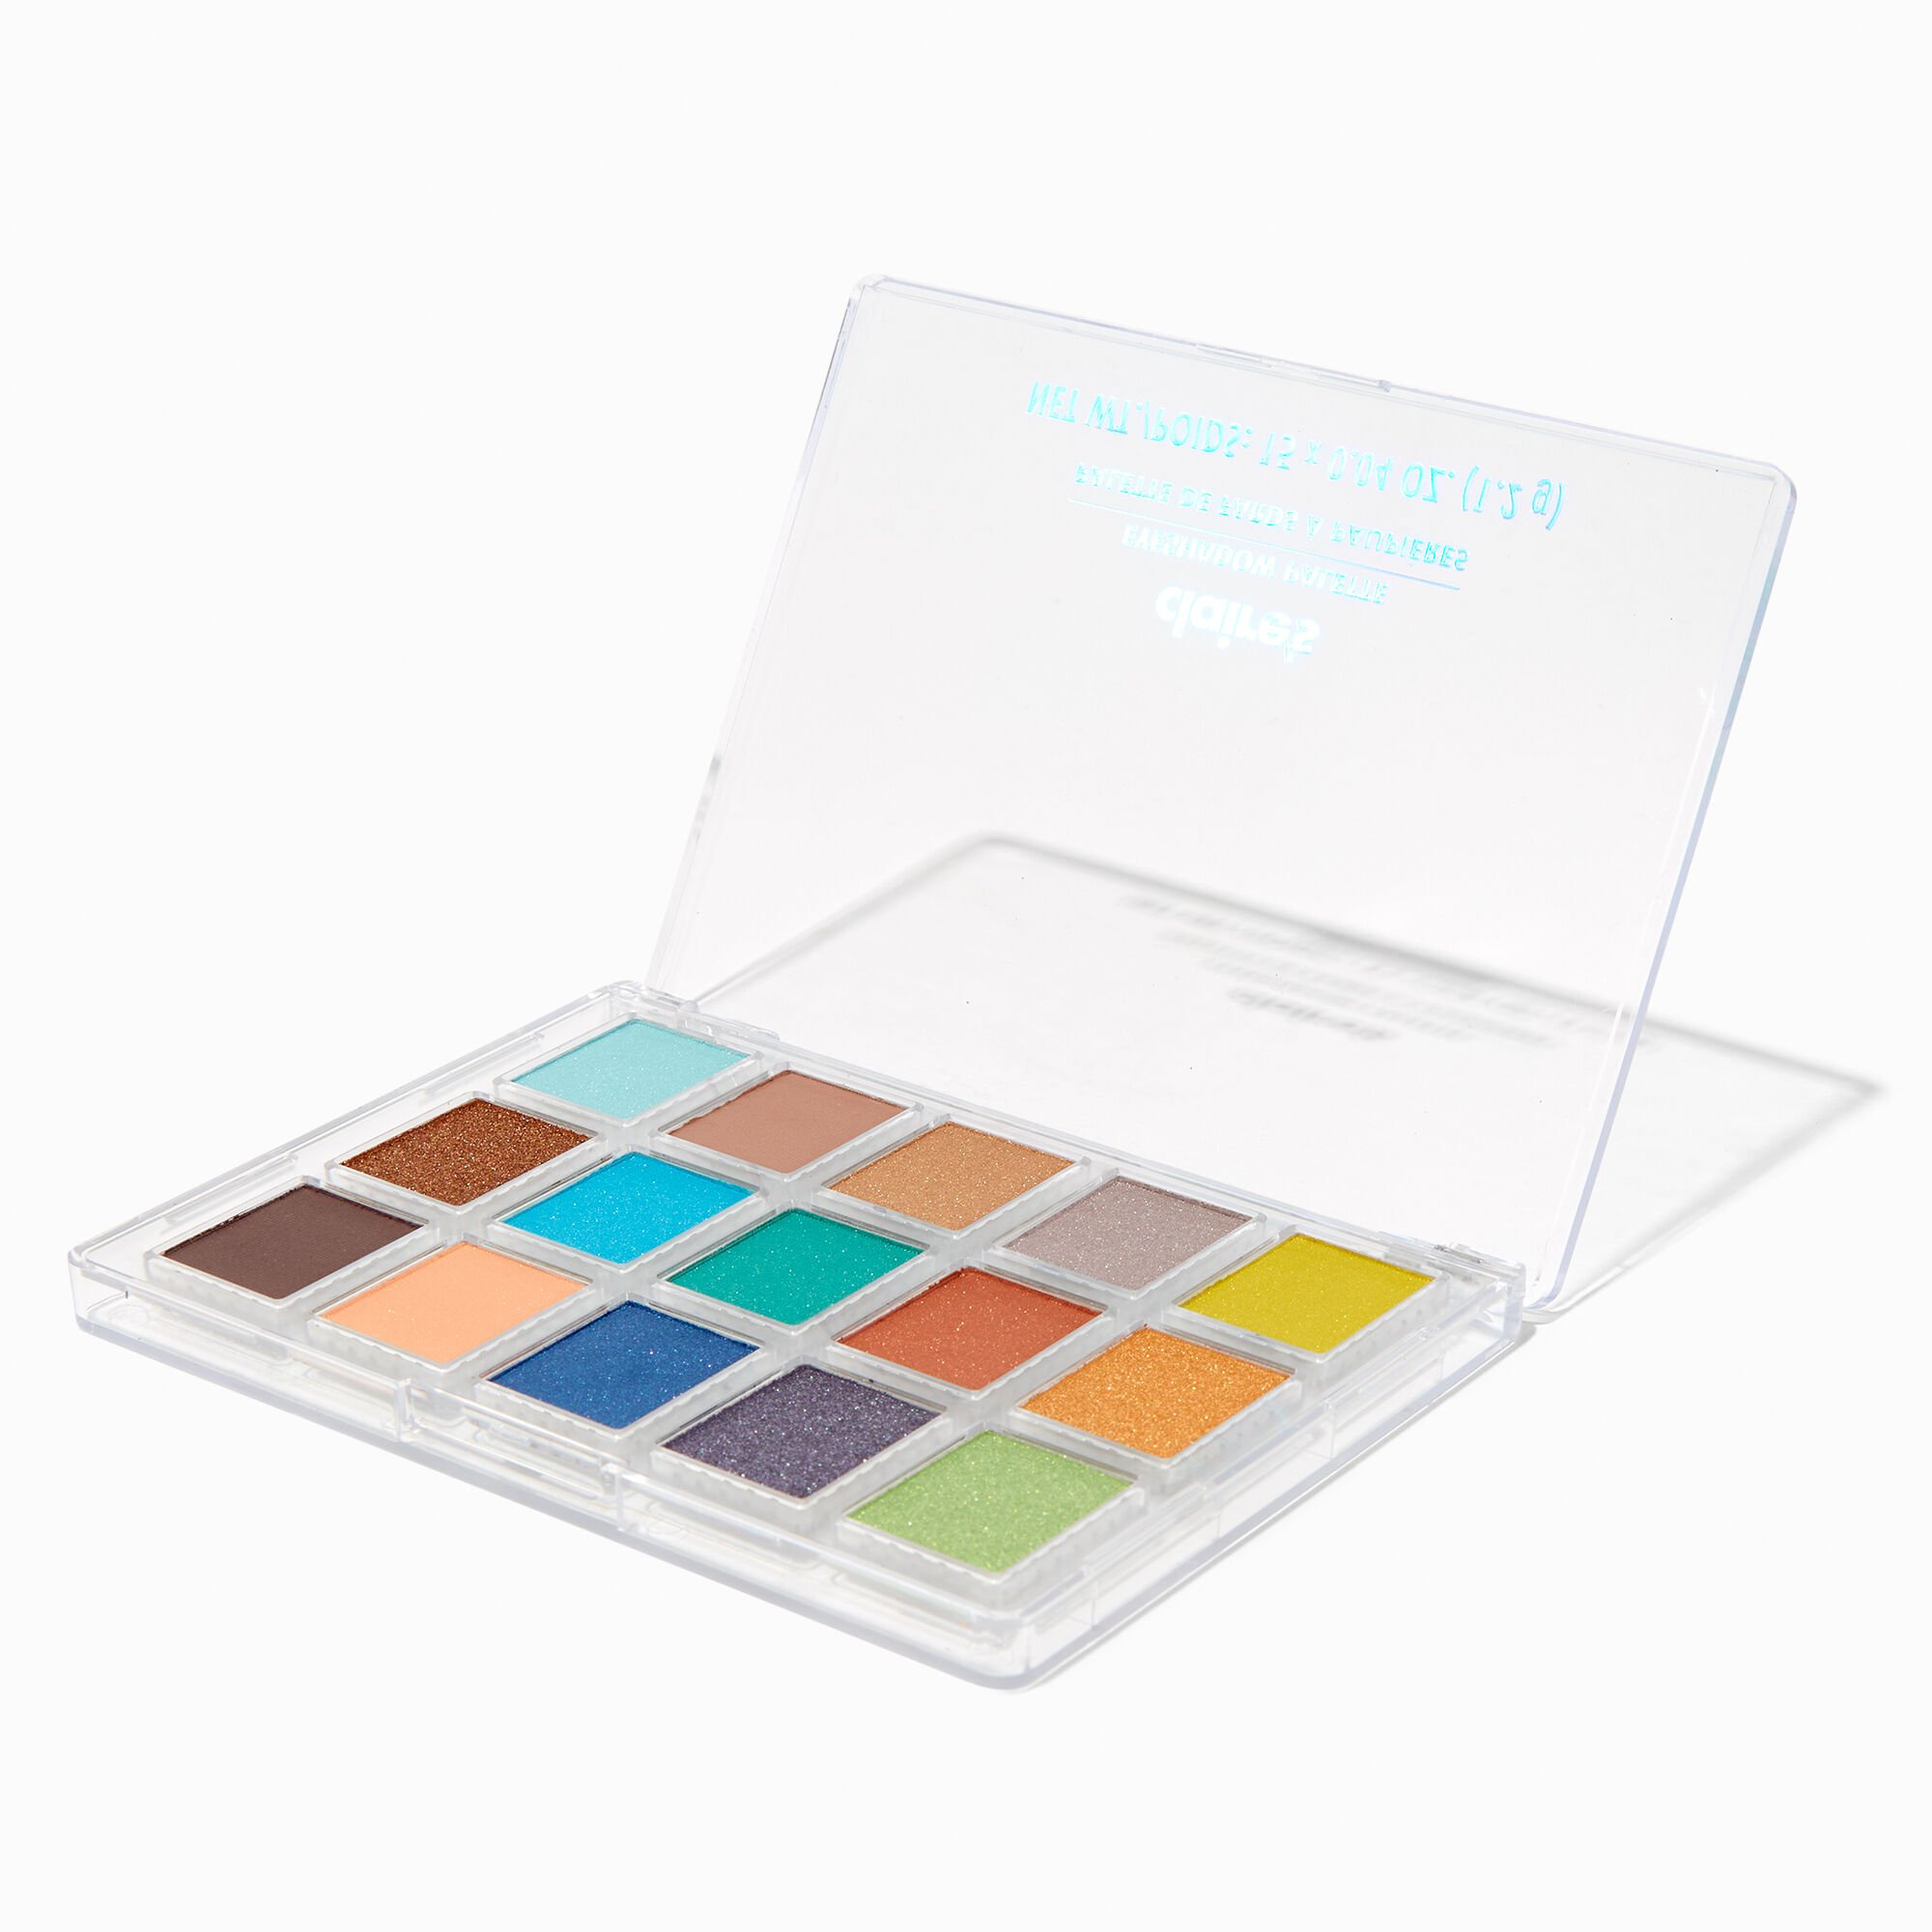 View Claires Western Shimmer Eyeshadow Palette information